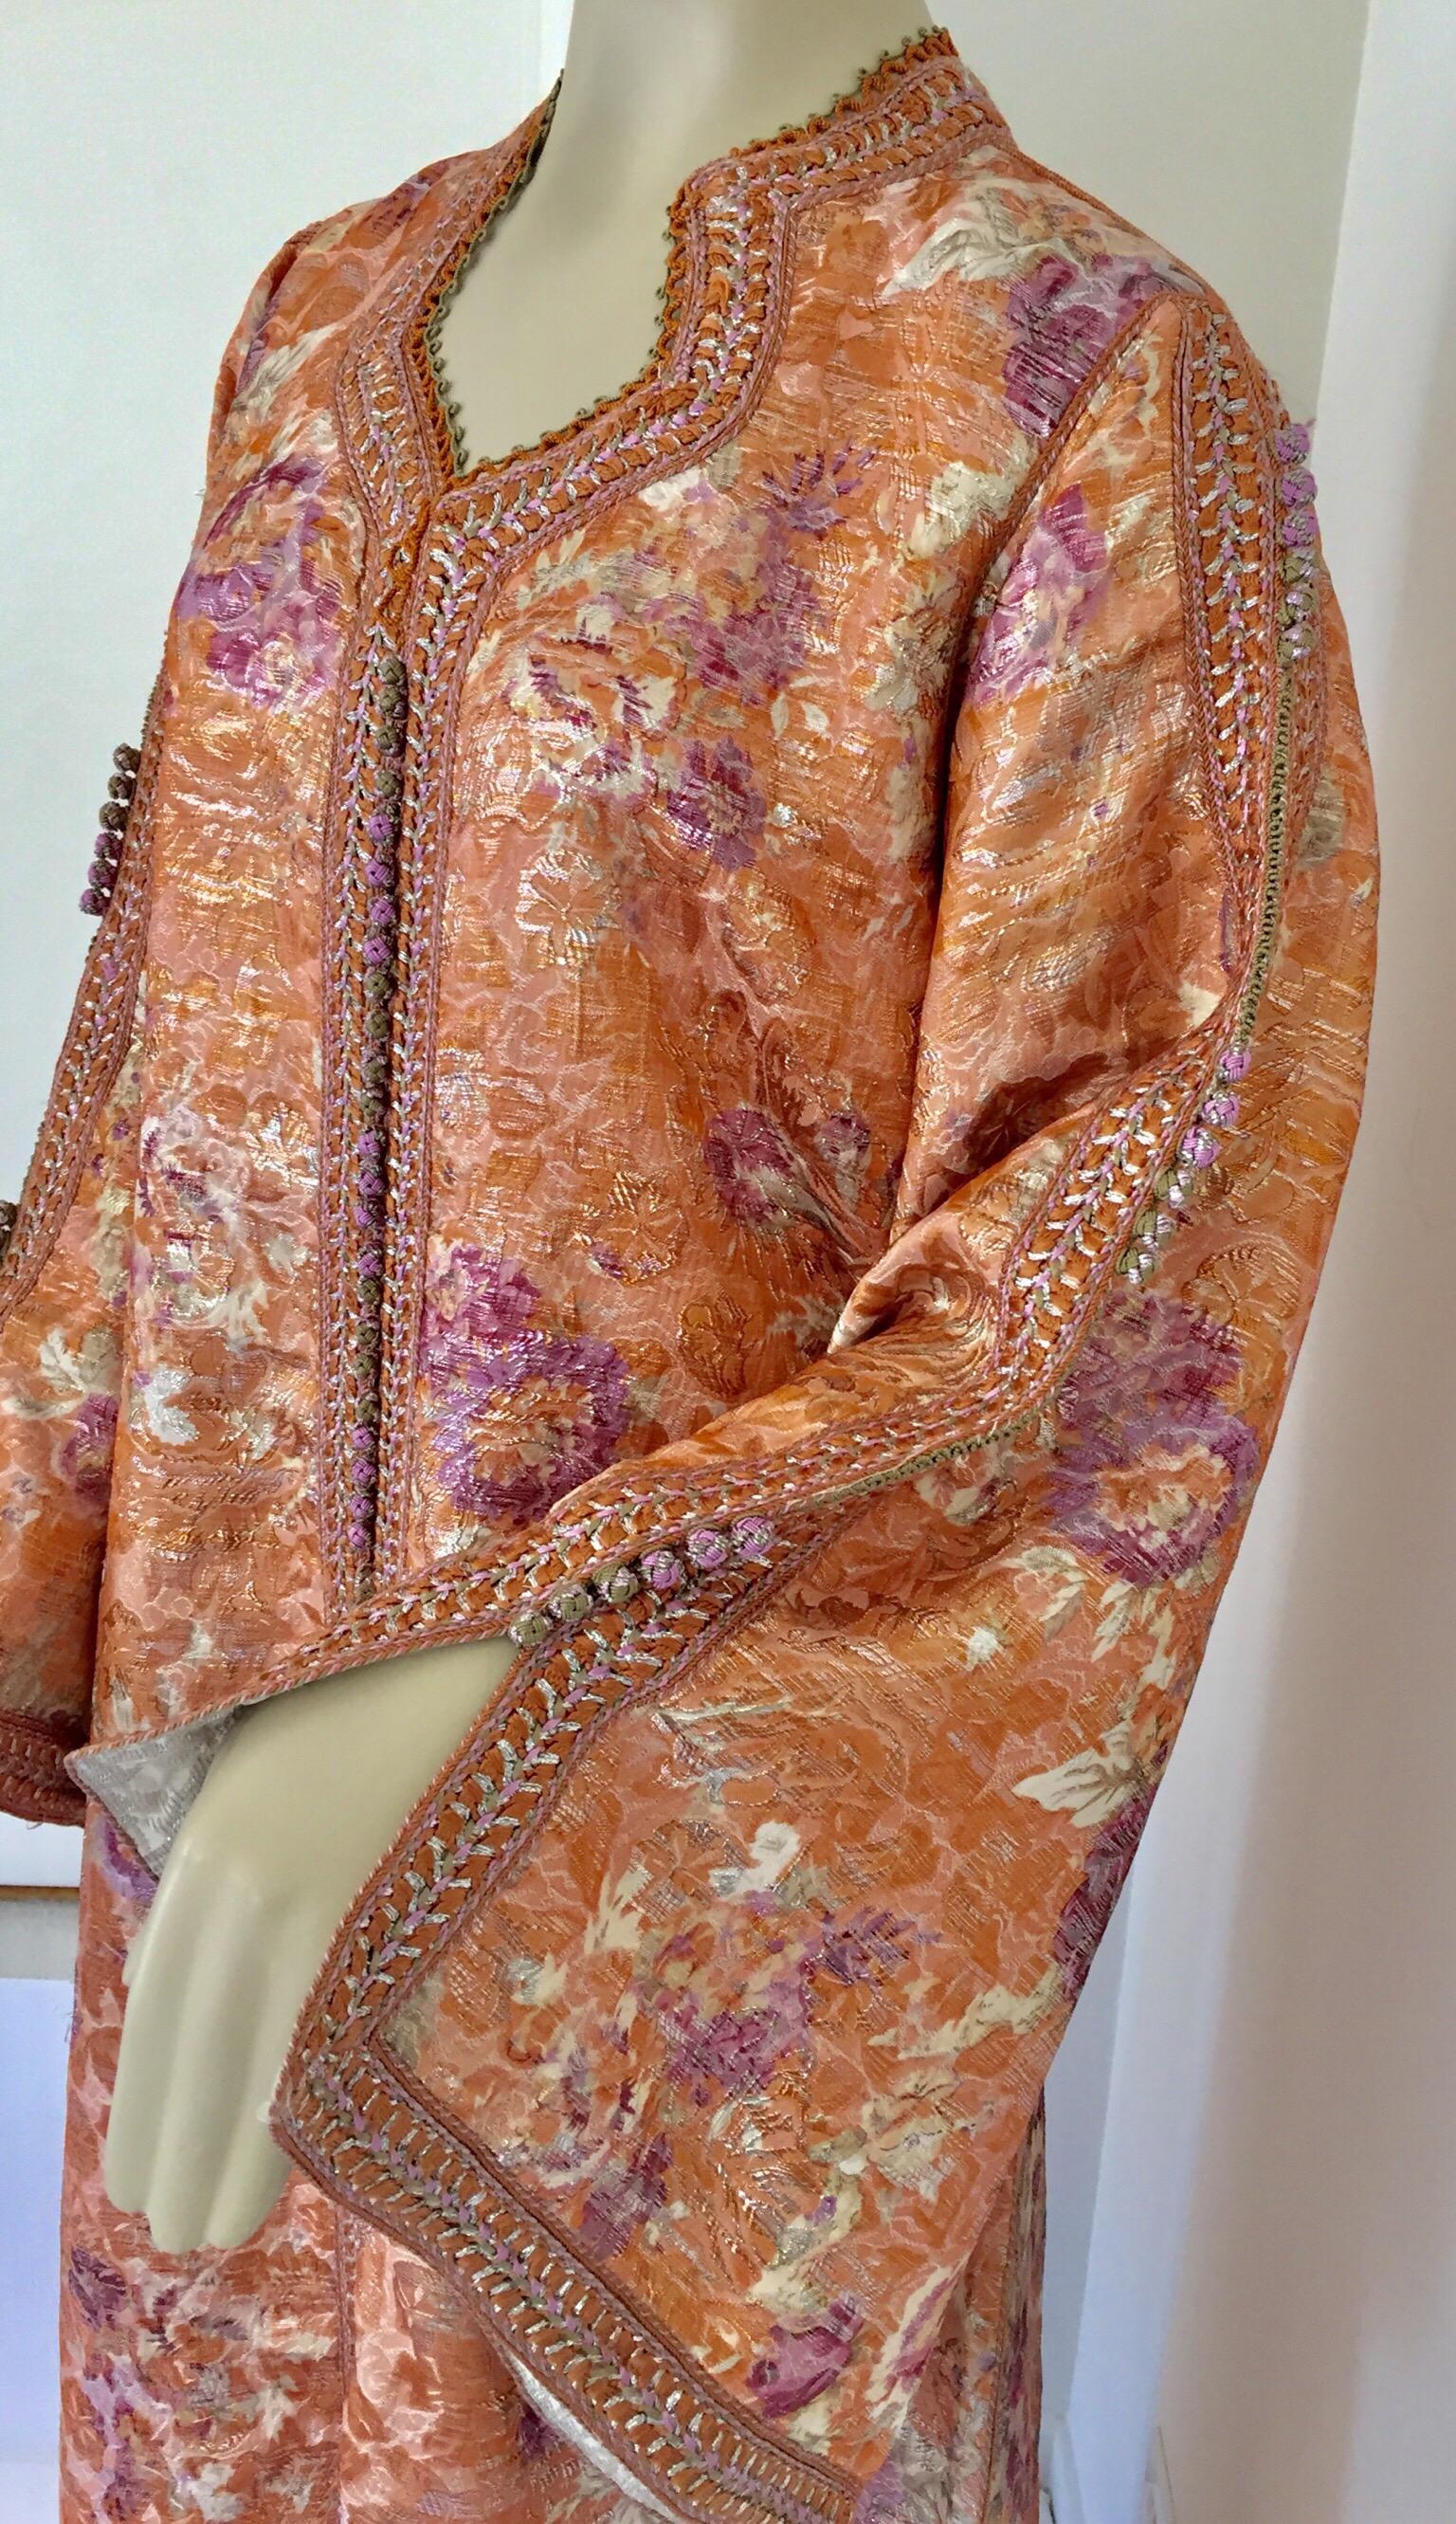 Moroccan Kaftan Orange and Purple Floral with Gold Embroidered Maxi Dress Caftan For Sale 1